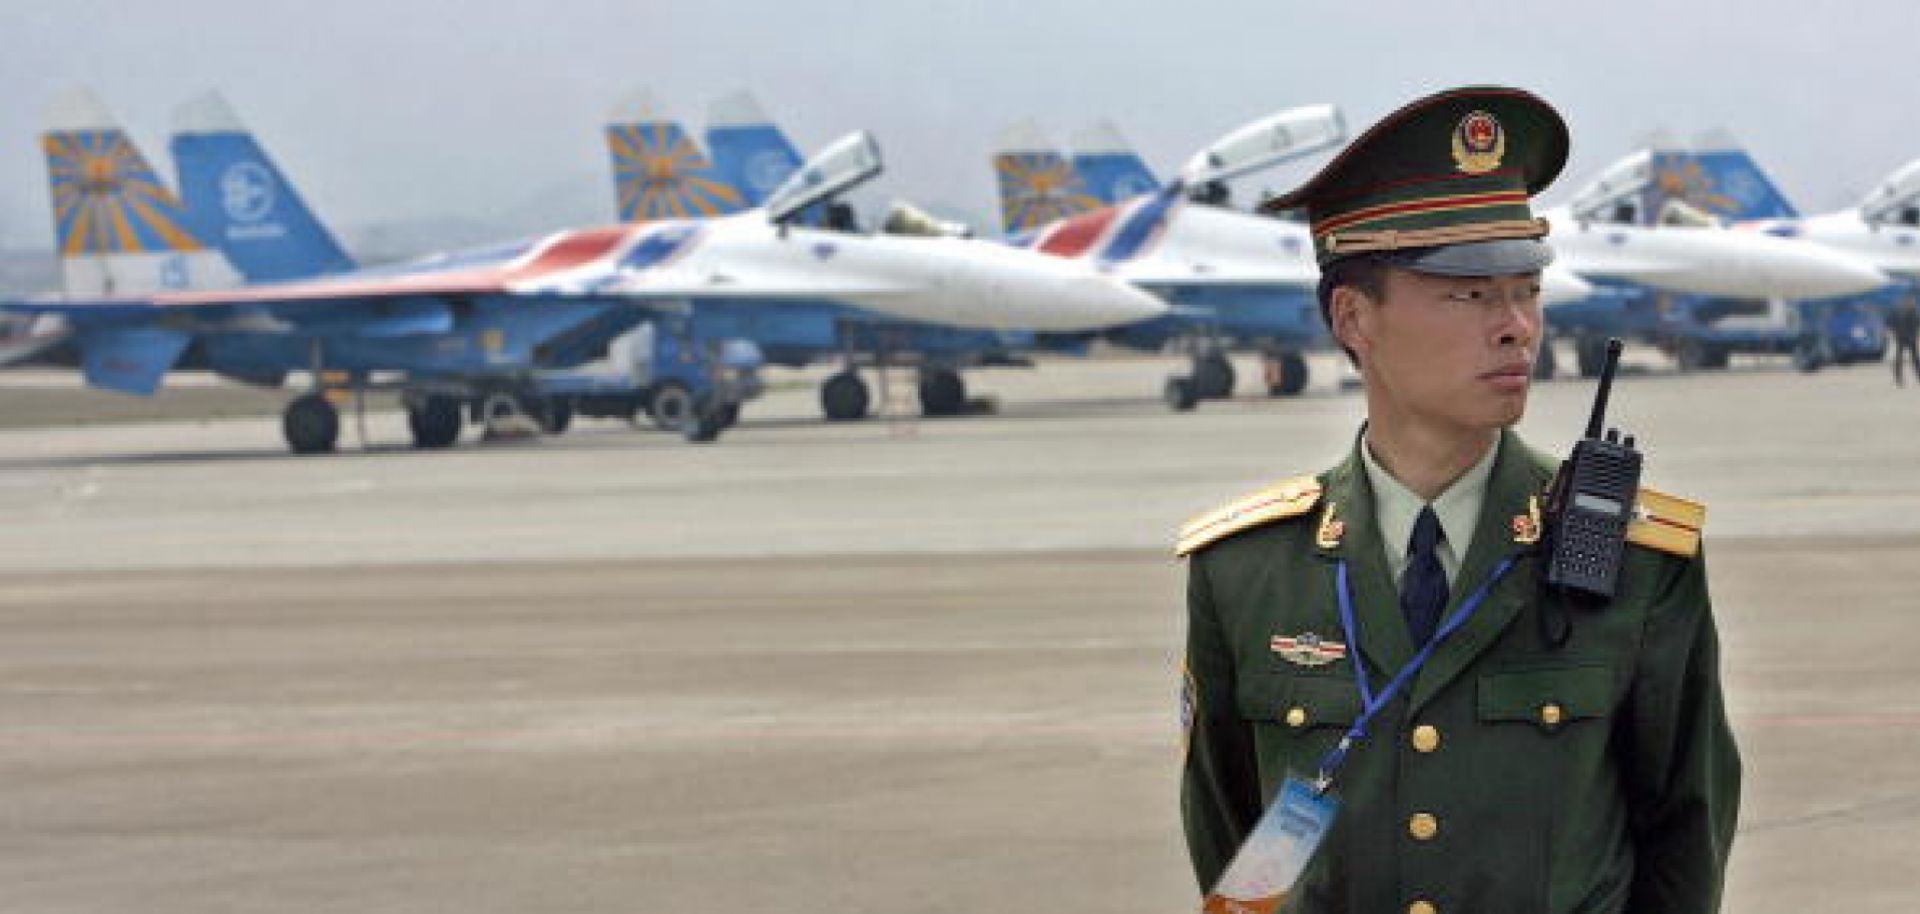 A Chinese officer stands guard before a row of Russian Su-27 'Flankers'. Negotiations over the sale of Russian navy fighter jets to China have broken down. The dispute actually represents a much larger issue -- China's growing expertise at reverse-engineering and copying Russia's military hardware.